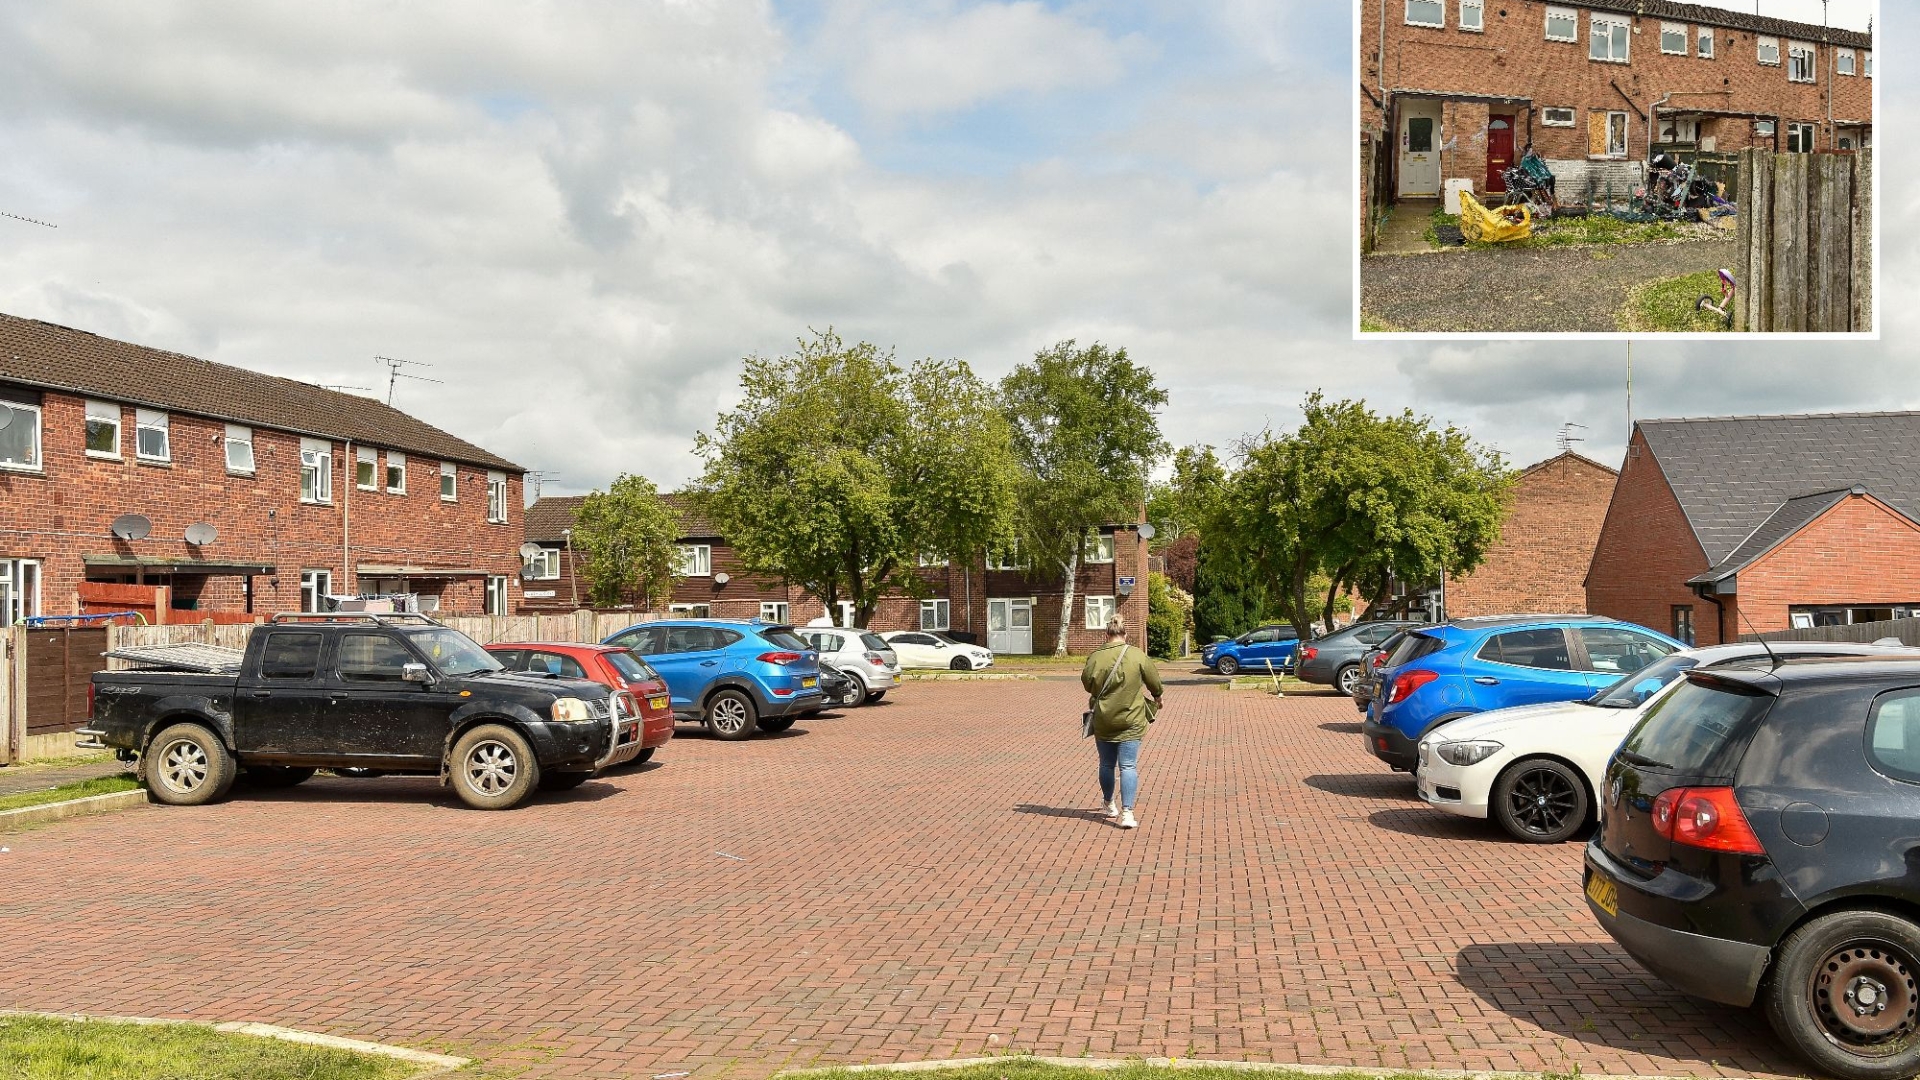 We live next to the UK’s ‘grossest’ car park – we’re kept up all night by couples romping in their vehicles